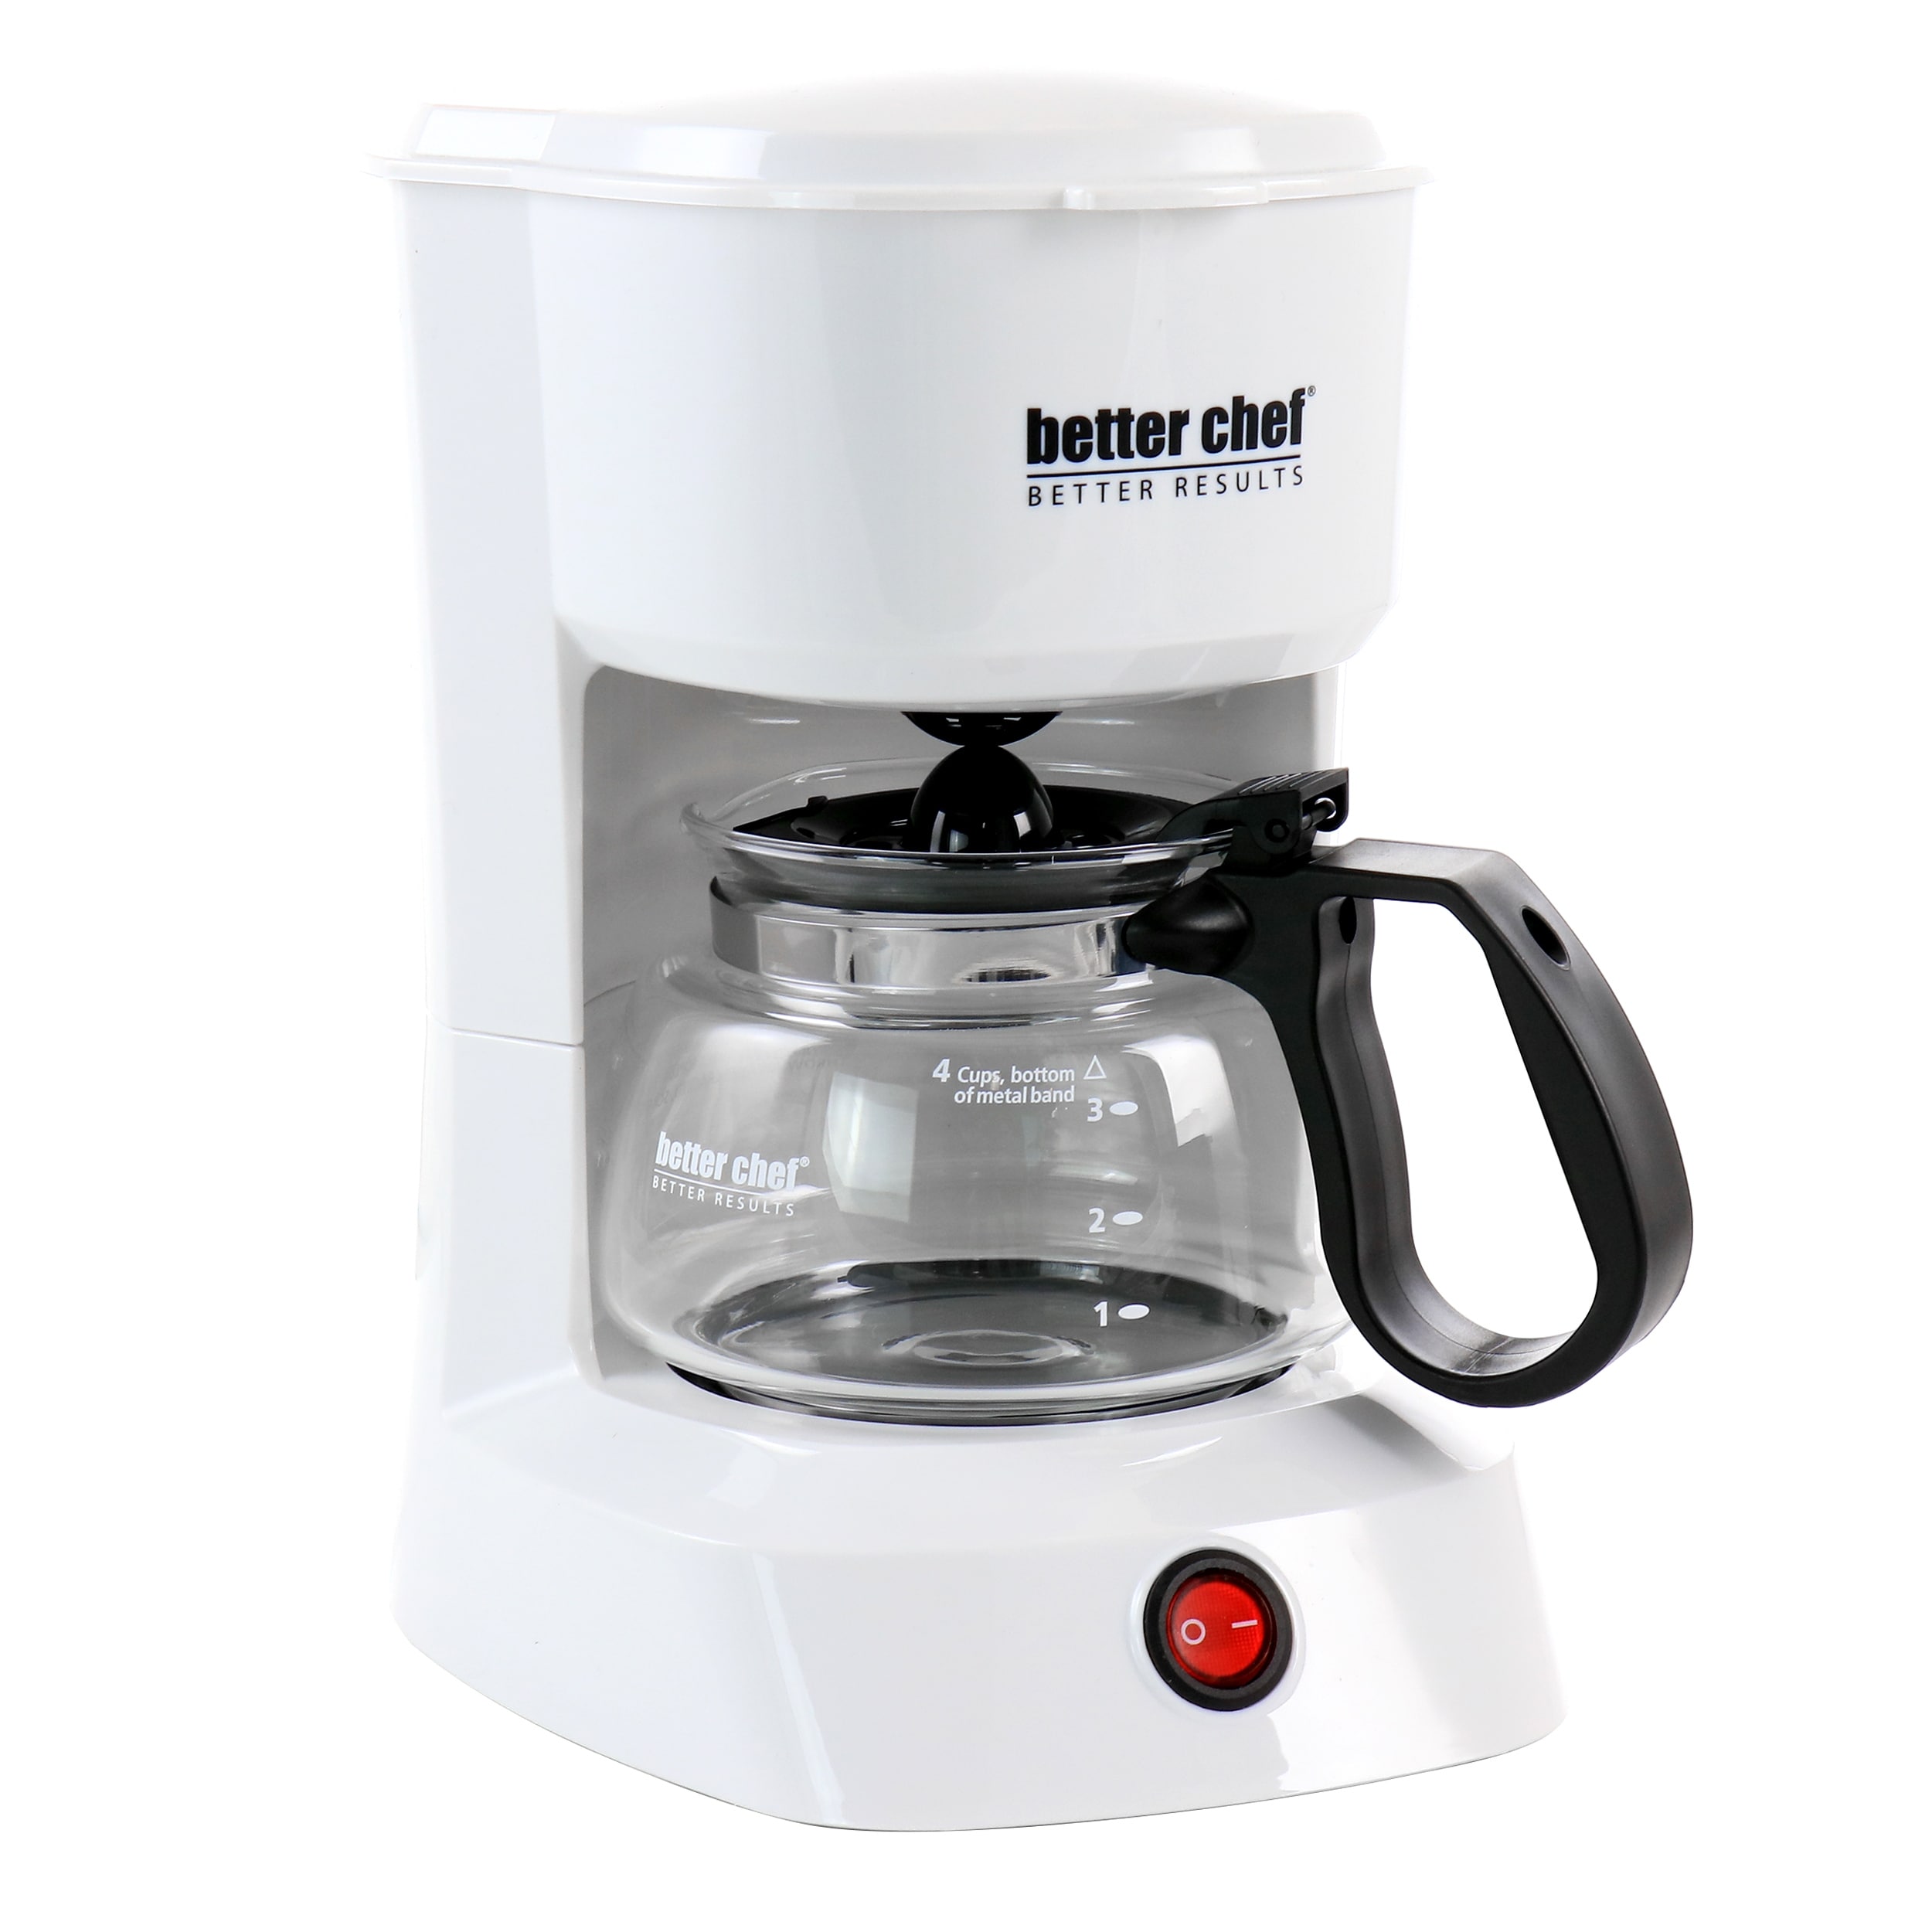 https://ak1.ostkcdn.com/images/products/is/images/direct/1eca3ec653d1f3d9a21f5c5cd67e86268ac07028/Better-Chef-4-Cup-Compact-Coffee-Maker.jpg